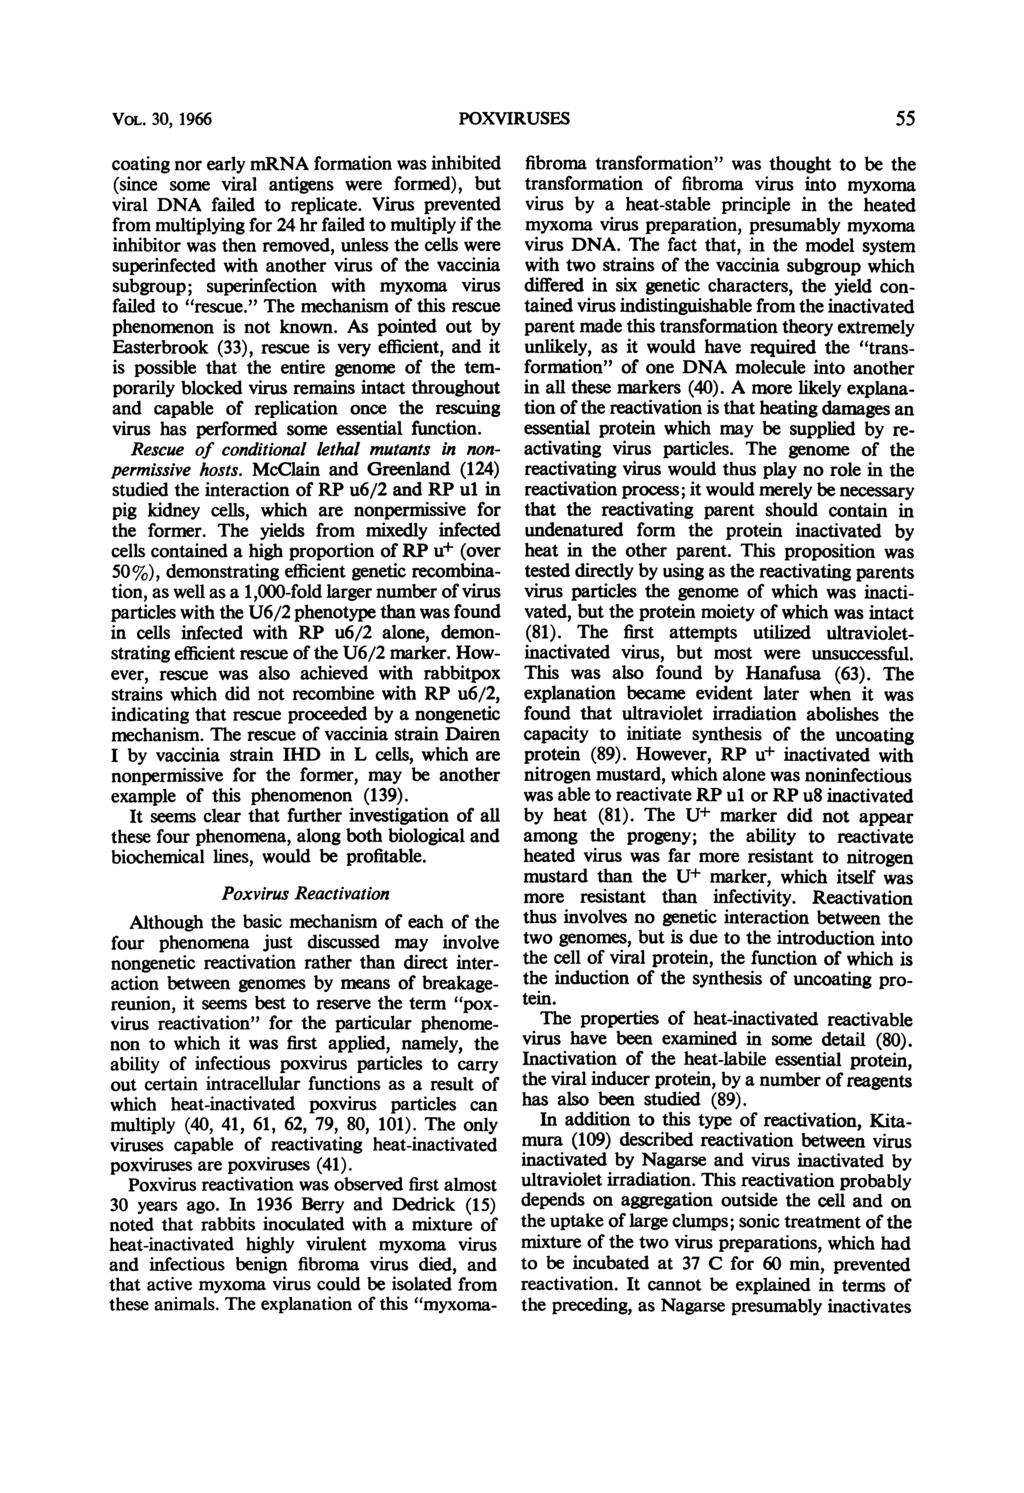 VOL. 30, 1966 POXVIRUSES 55 coating nor early mrna formation was inhibited (since some viral antigens were formed), but viral DNA failed to replicate.